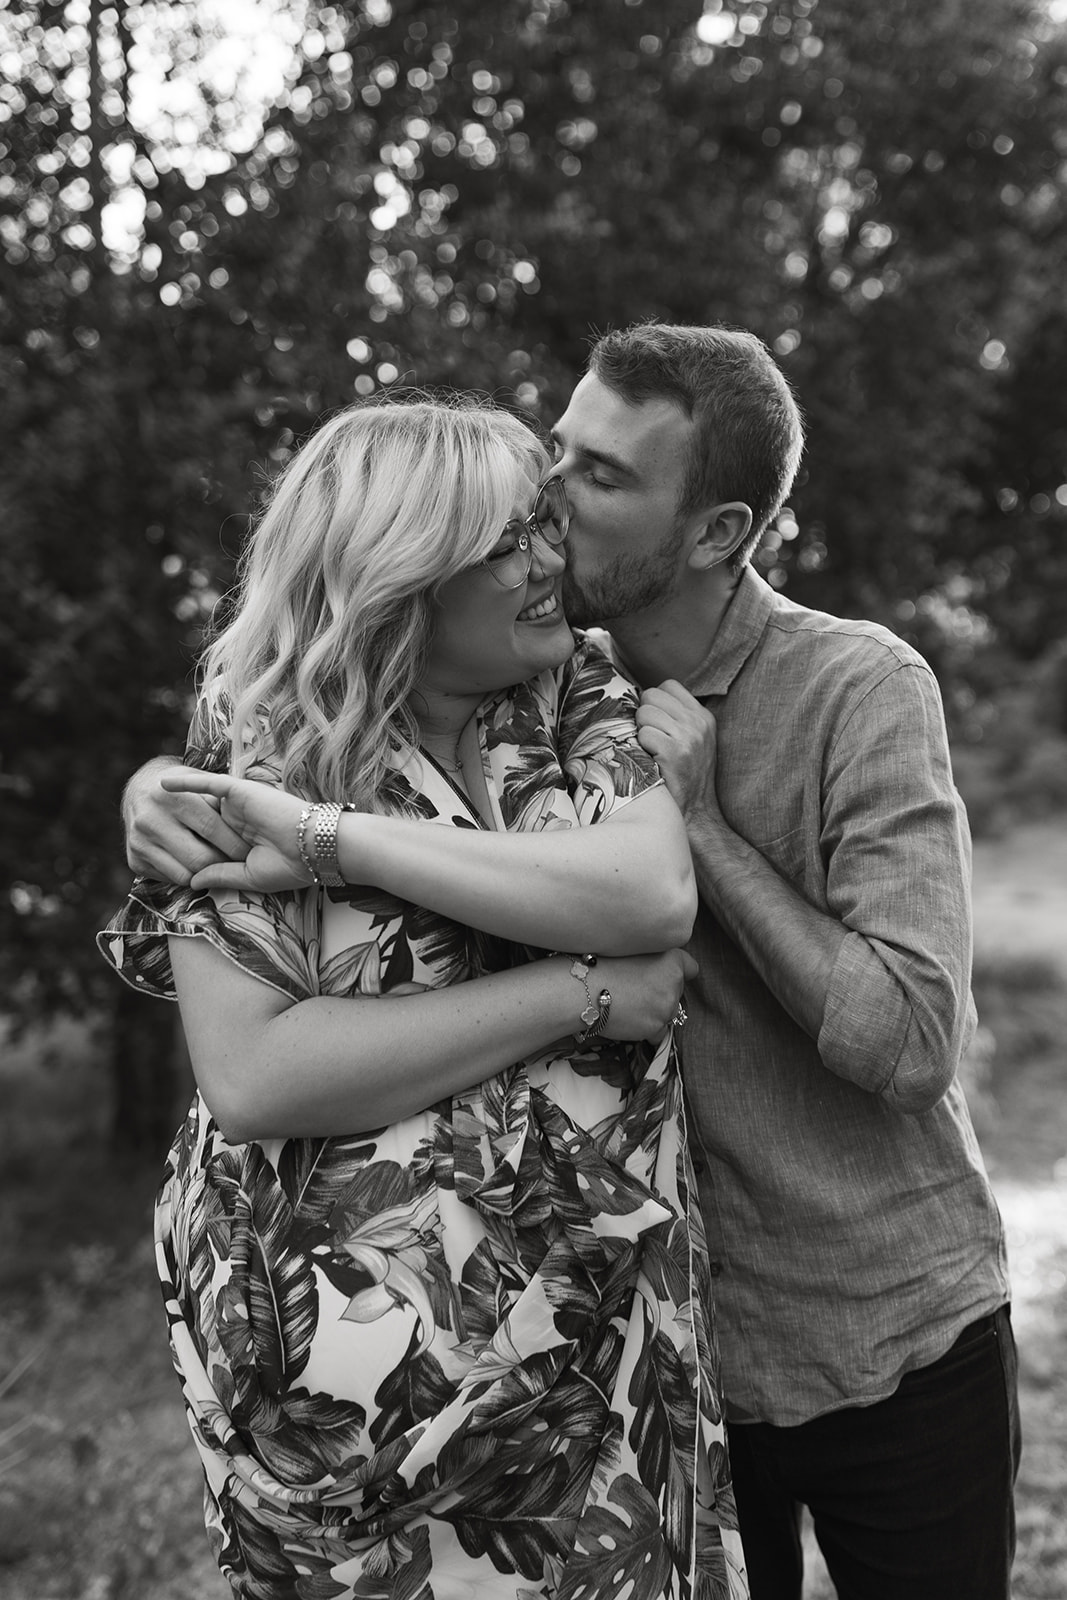 hiltscher park fullerton california engagement session couples poses ideas engagement ring ideas rings outfit ideas